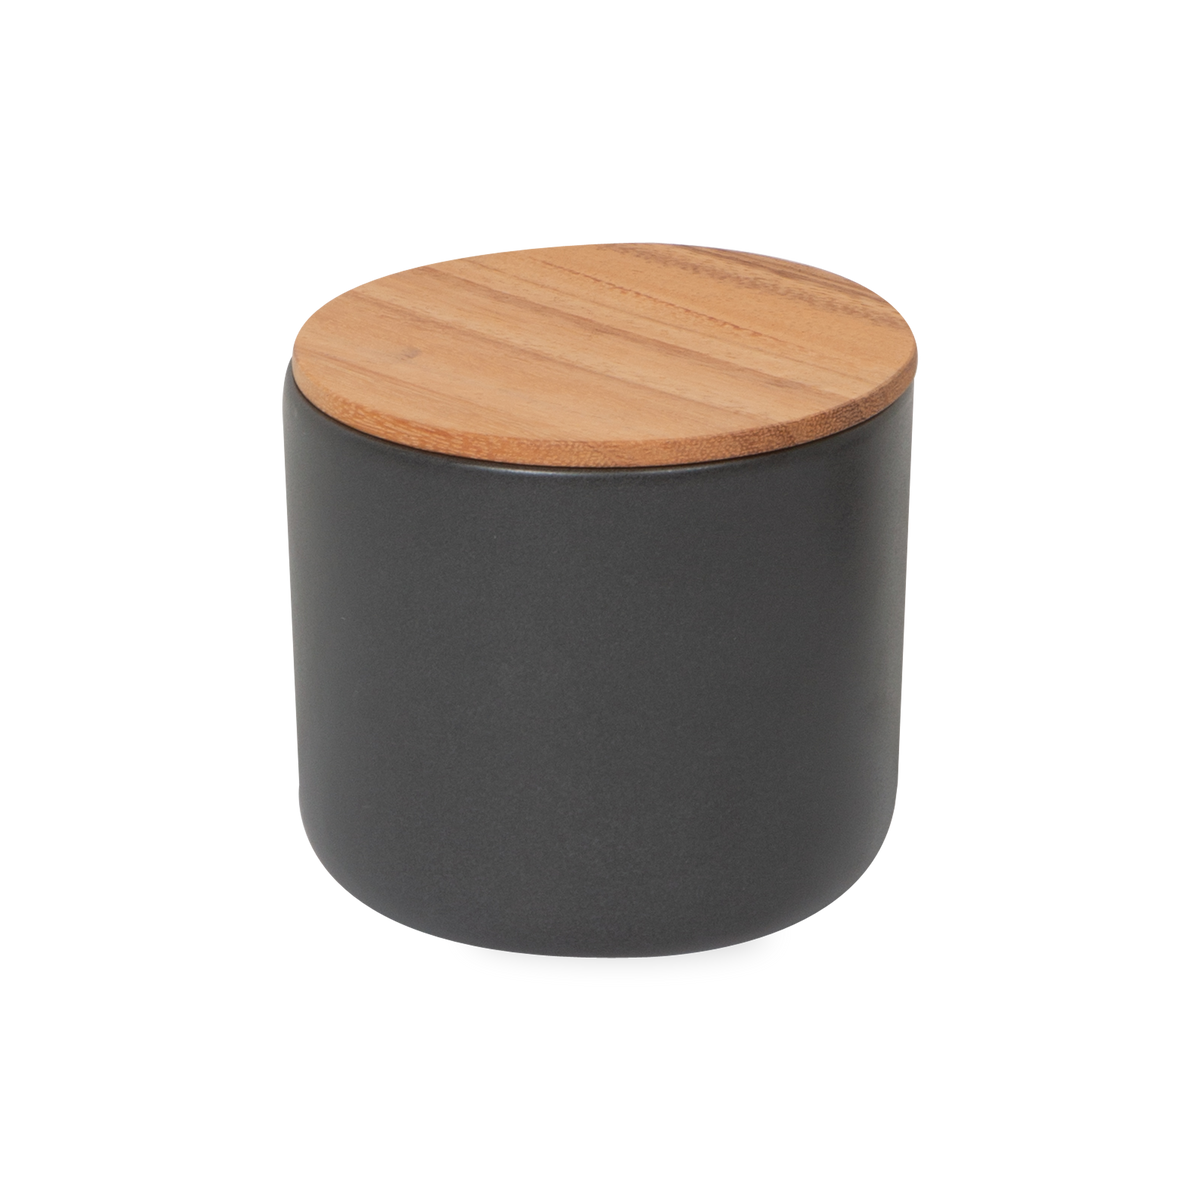 These Stoneware Acacia Canisters are handmade in Thailand and feature a ceramic body with an acacia wood lid to keep contents fresh and secure.